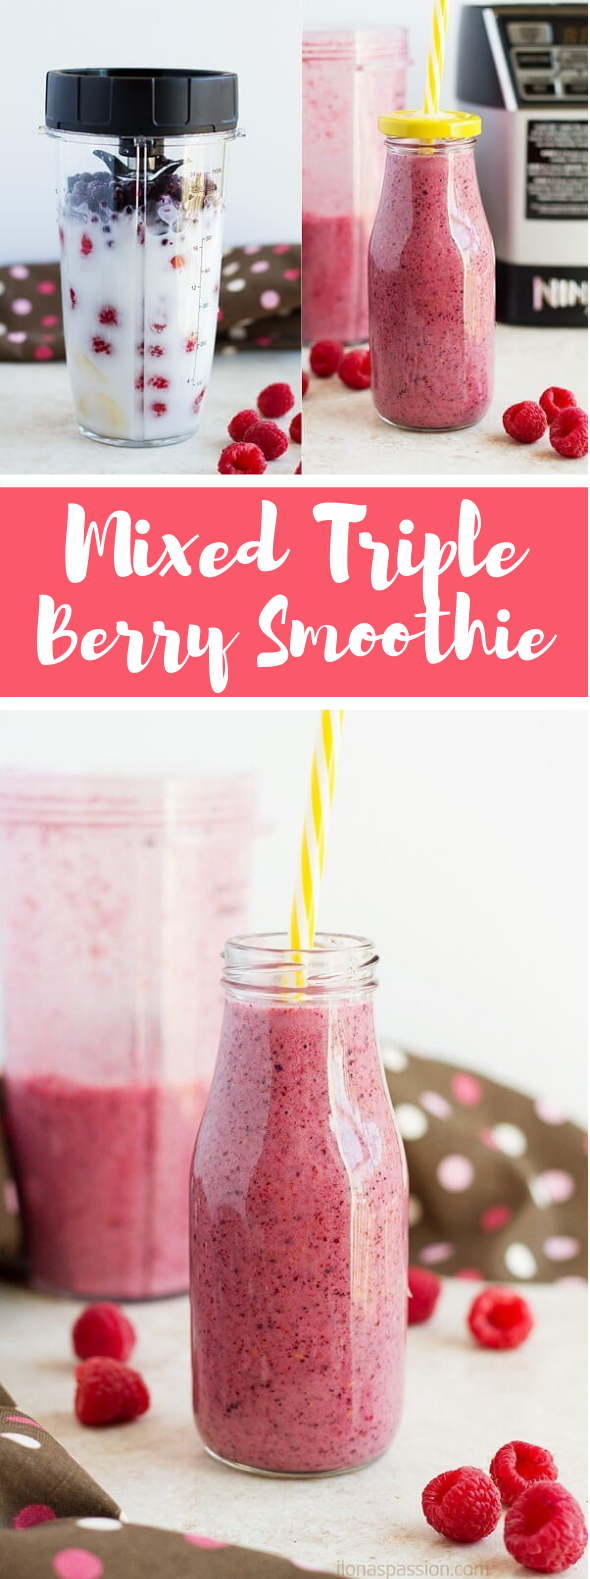 MIXED TRIPLE BERRY SMOOTHIE #healthydrink #smoothies